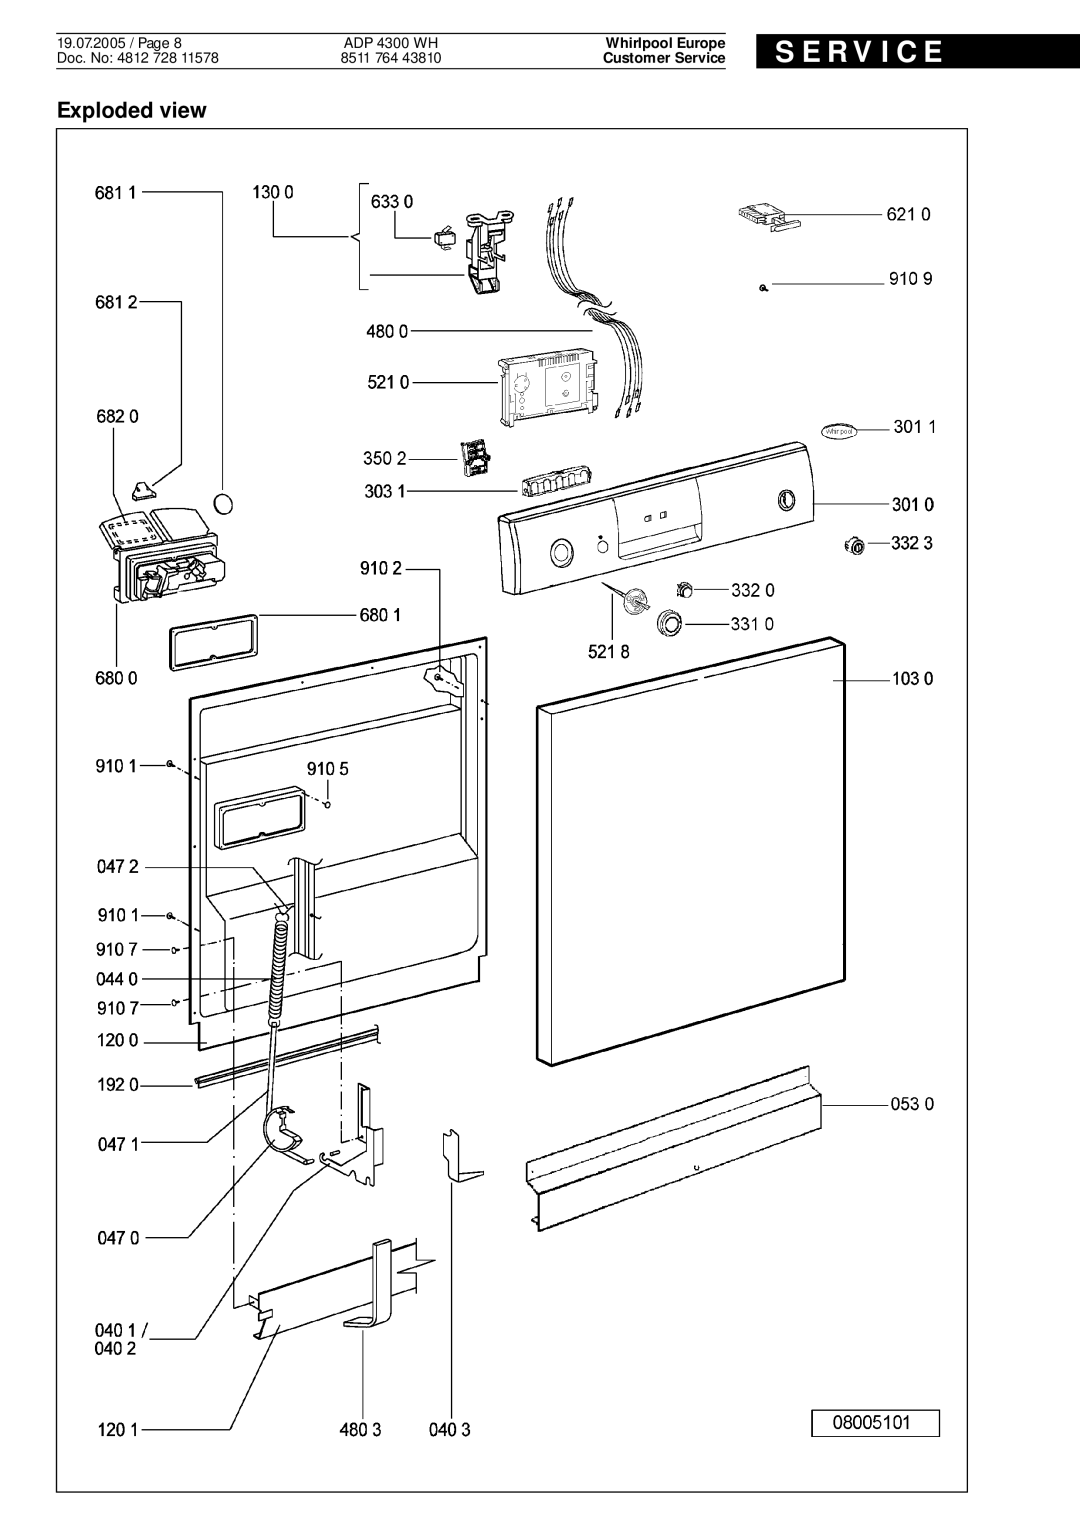 Whirlpool ADP 4300 WH service manual S E R V I C E, Exploded view, Whirlpool Europe, Customer Service 